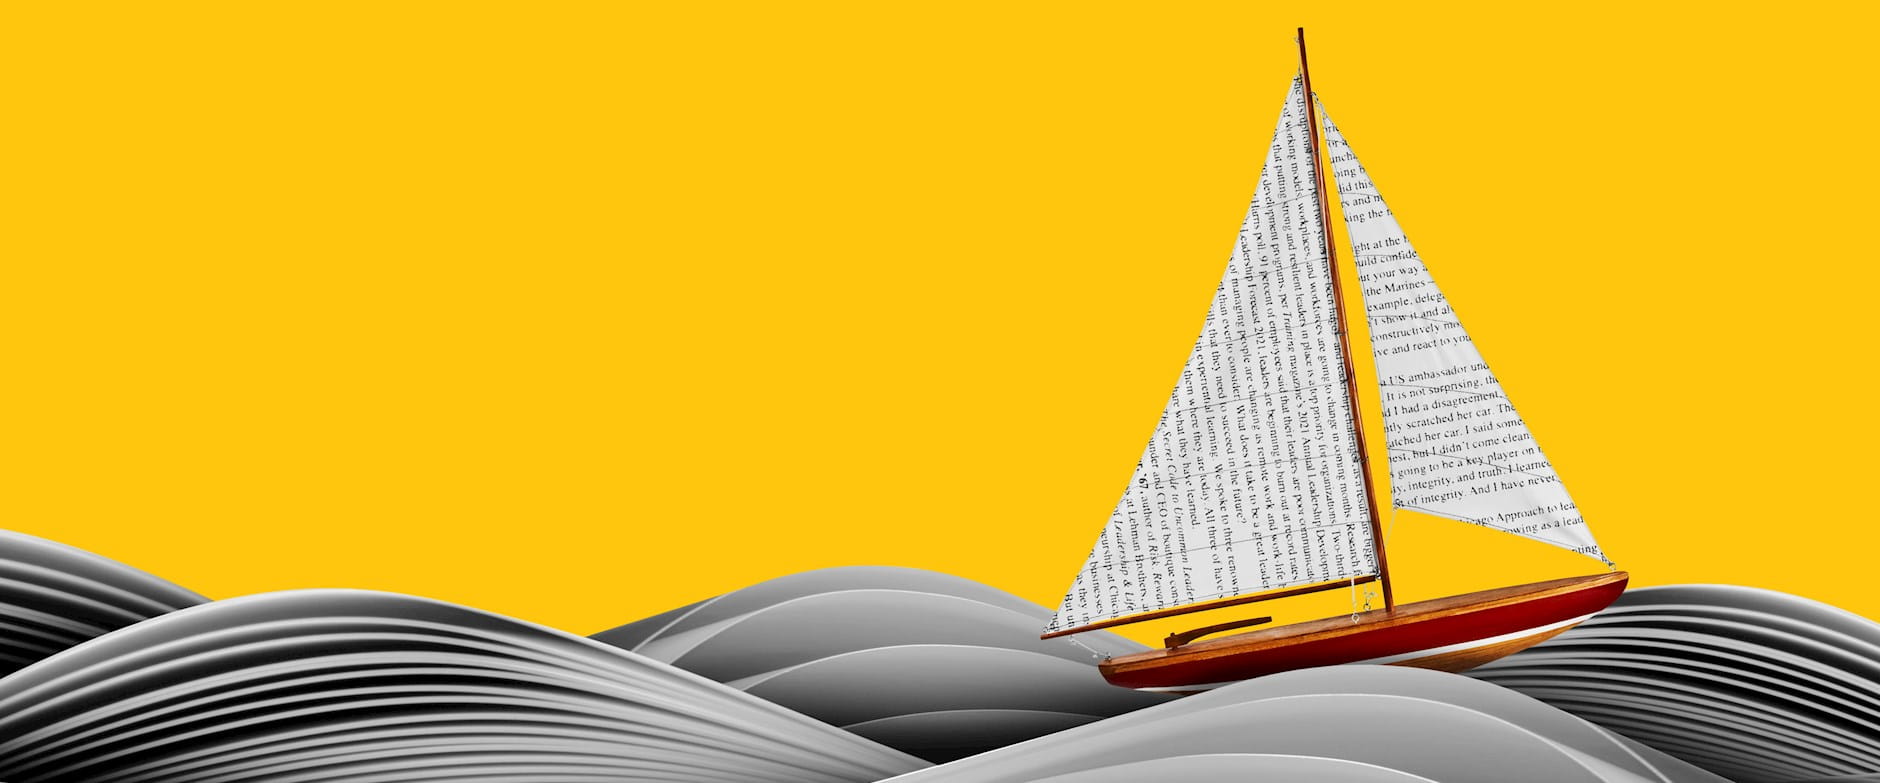 Paper boat sailing on a sea of book pages